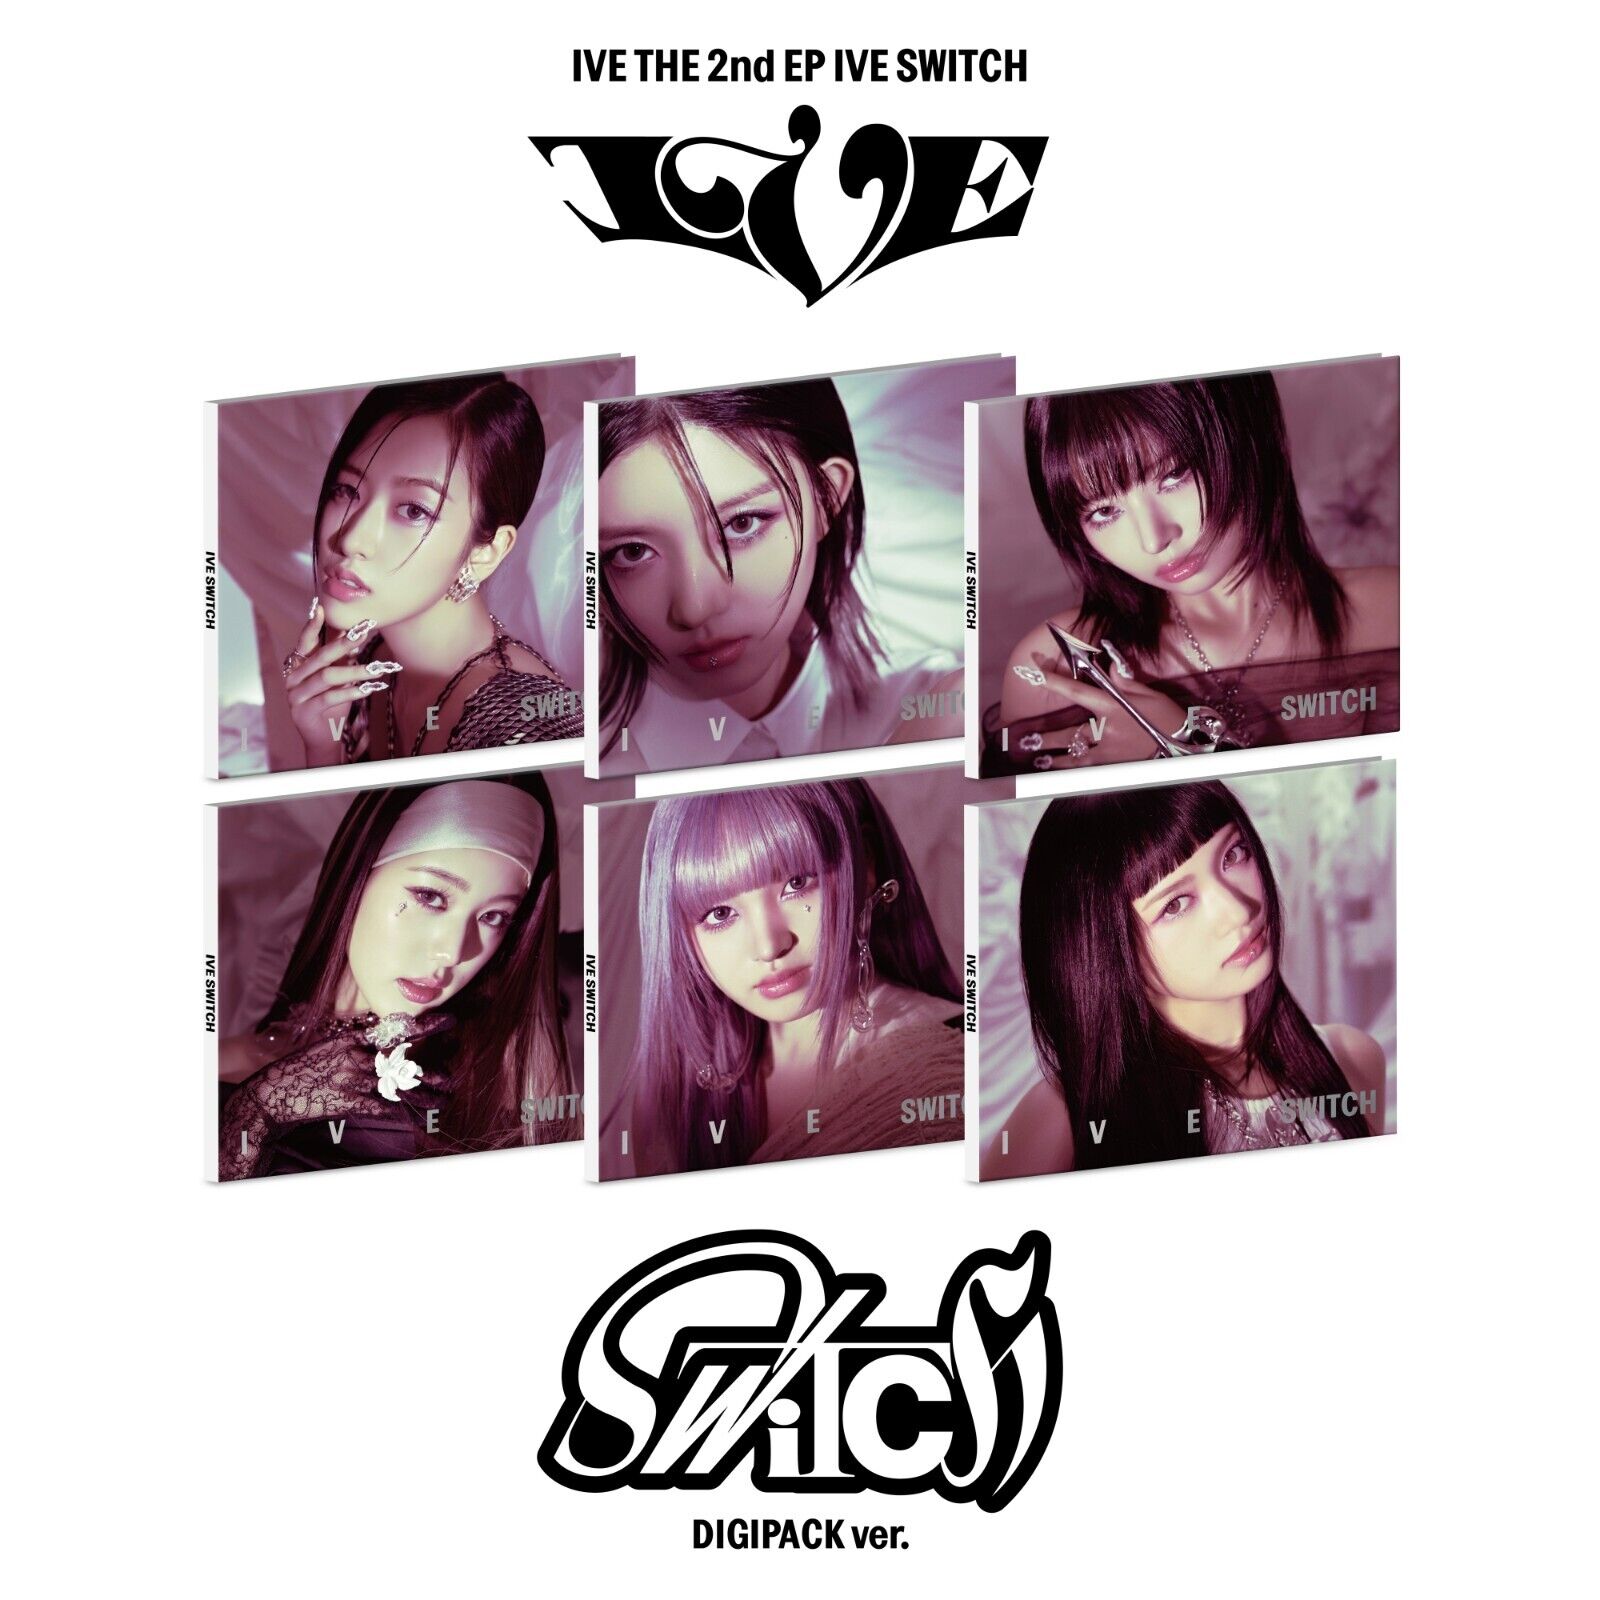 IVE [IVE SWITCH] 2nd EP Album (DIGIPACK Ver.) STARSHIP Square POB